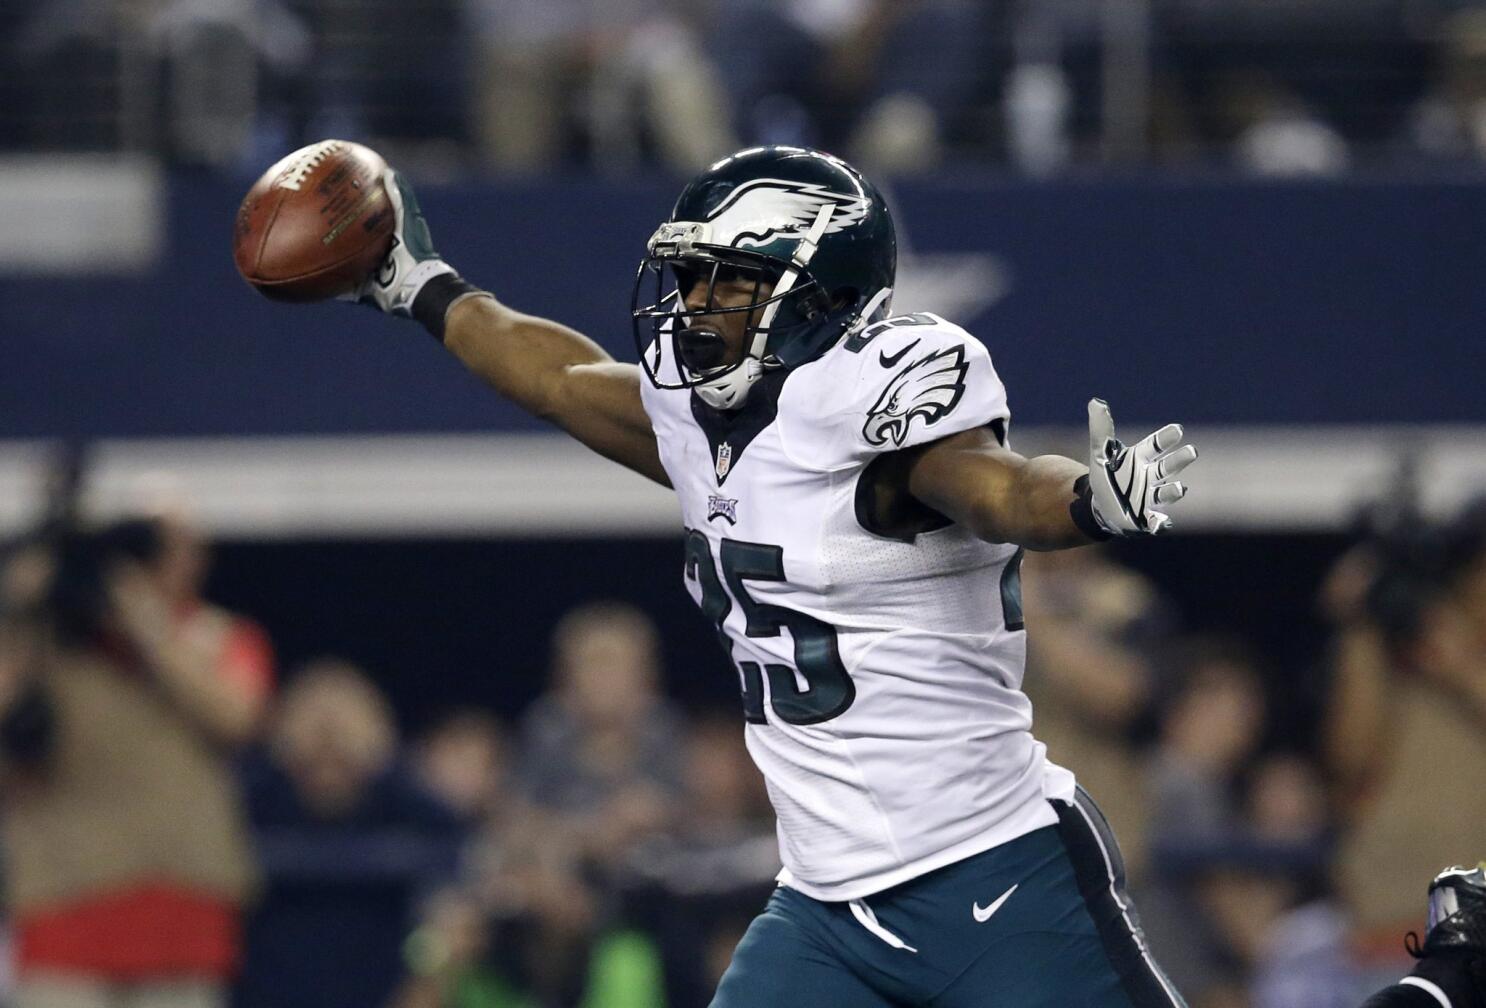 Eagles-Cowboys preview: With NFC East division lead on the line